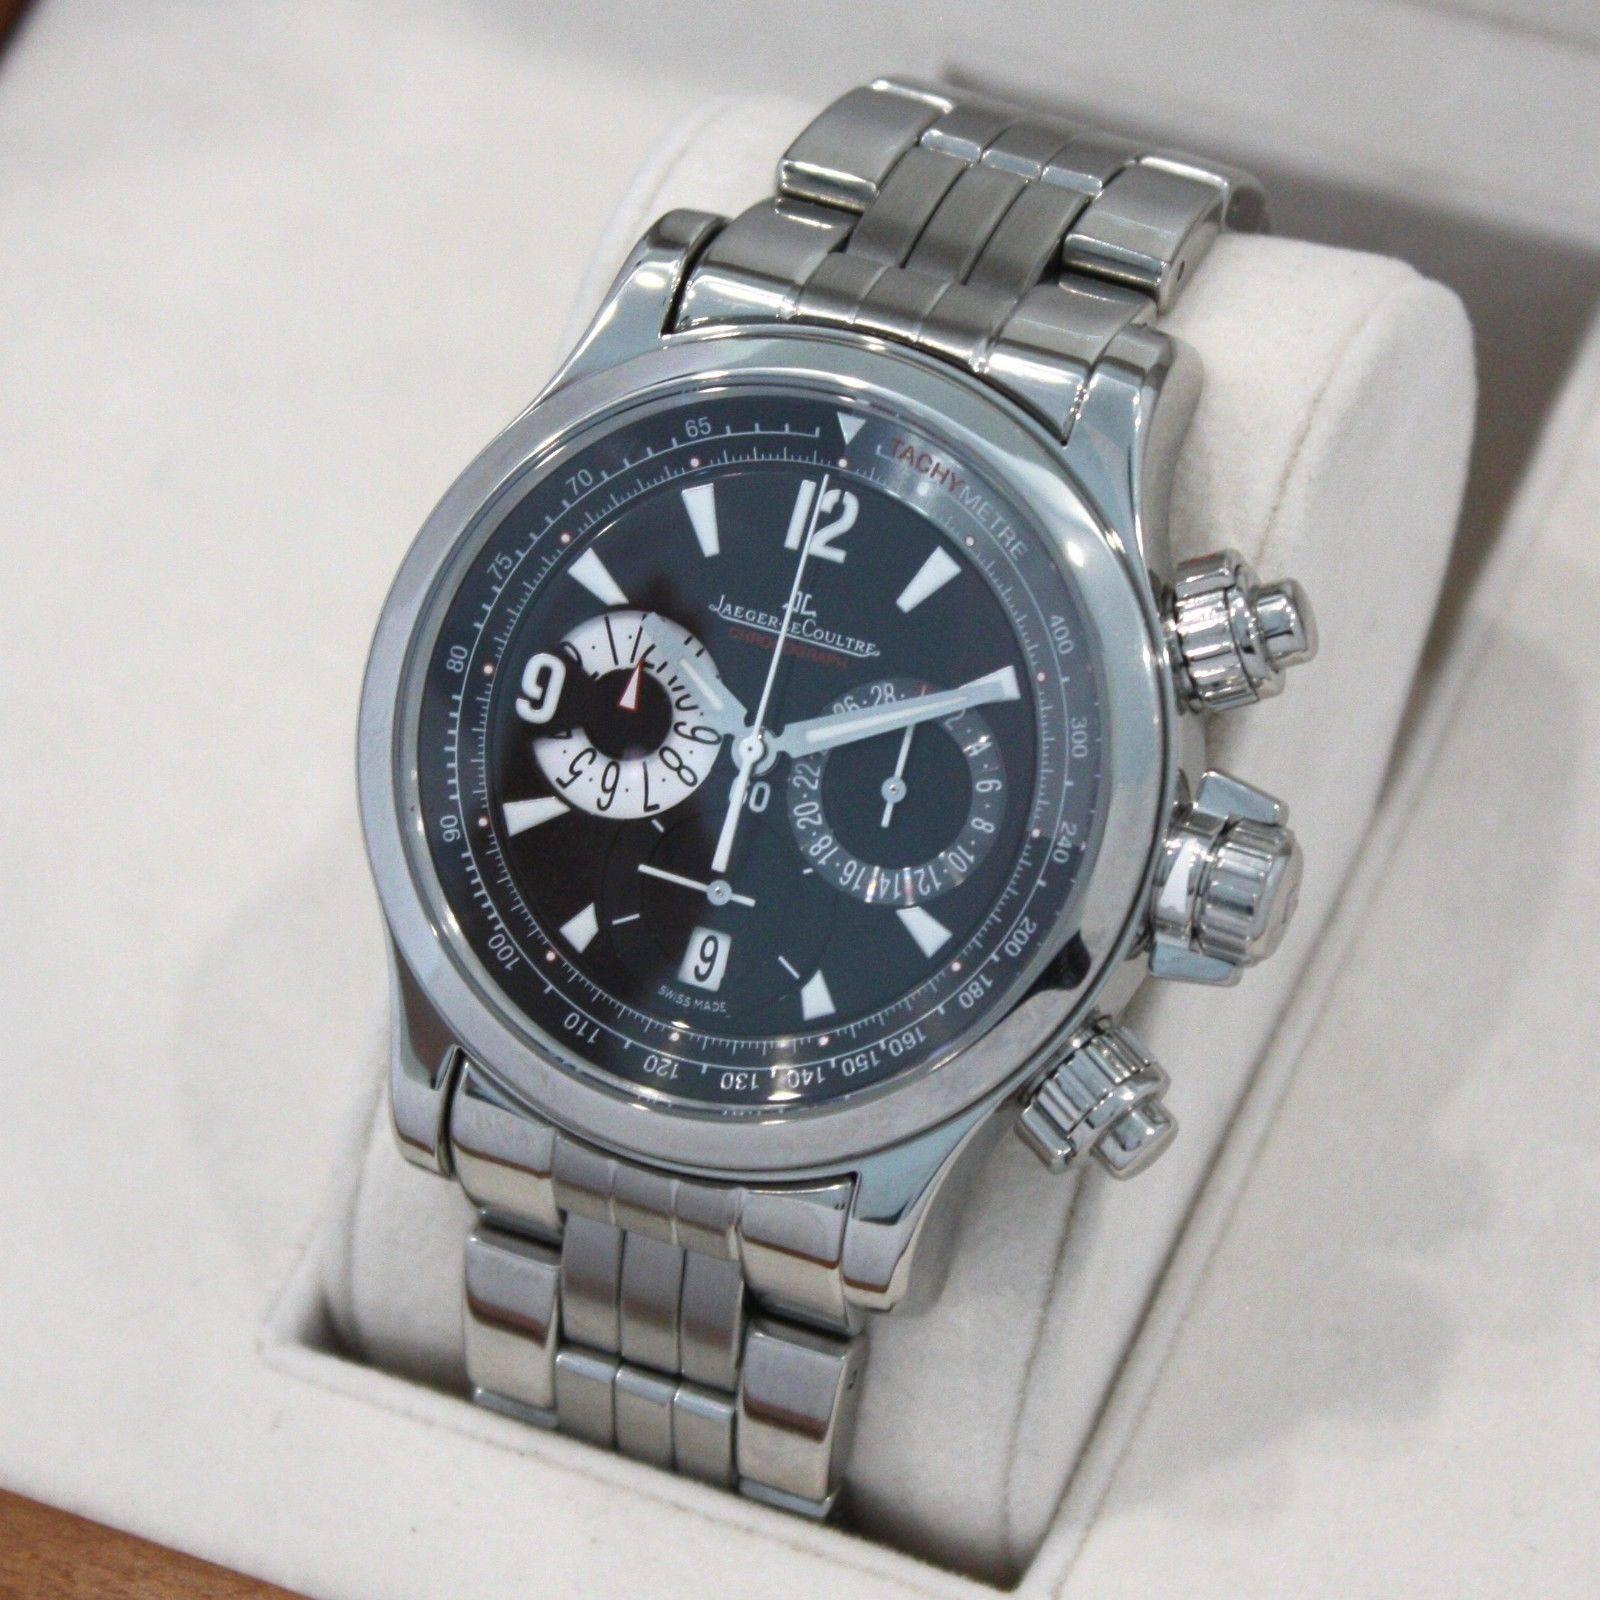 Jaeger-LeCoultre Stainless Steel Master Compressor Chronograph Wristwatch 1